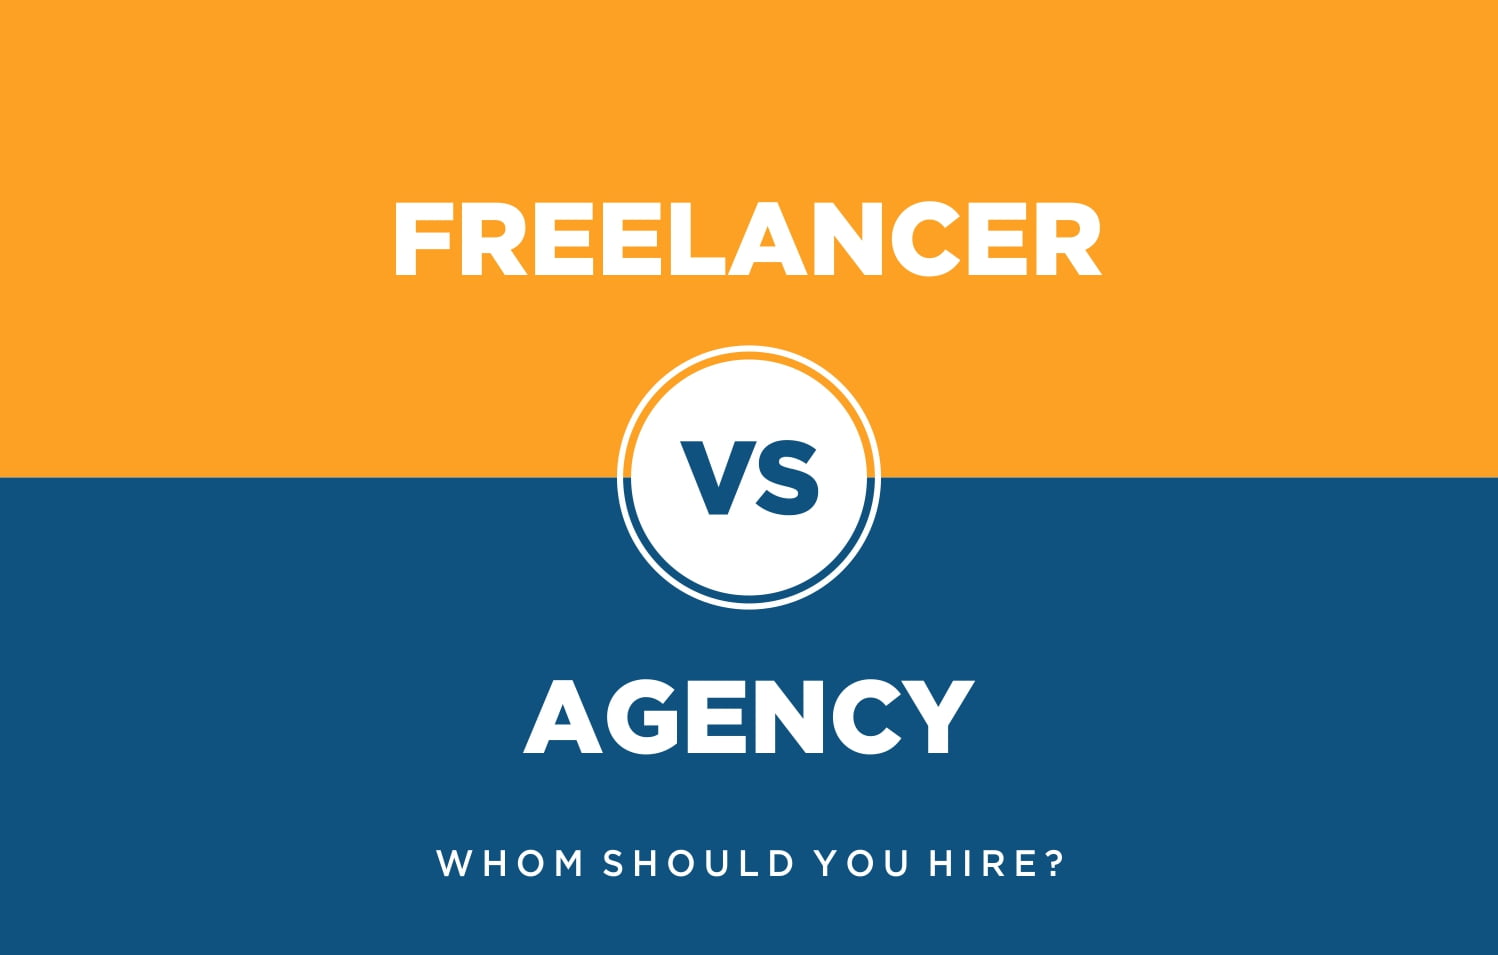 Whom Should You Hire? Freelancer or Agency